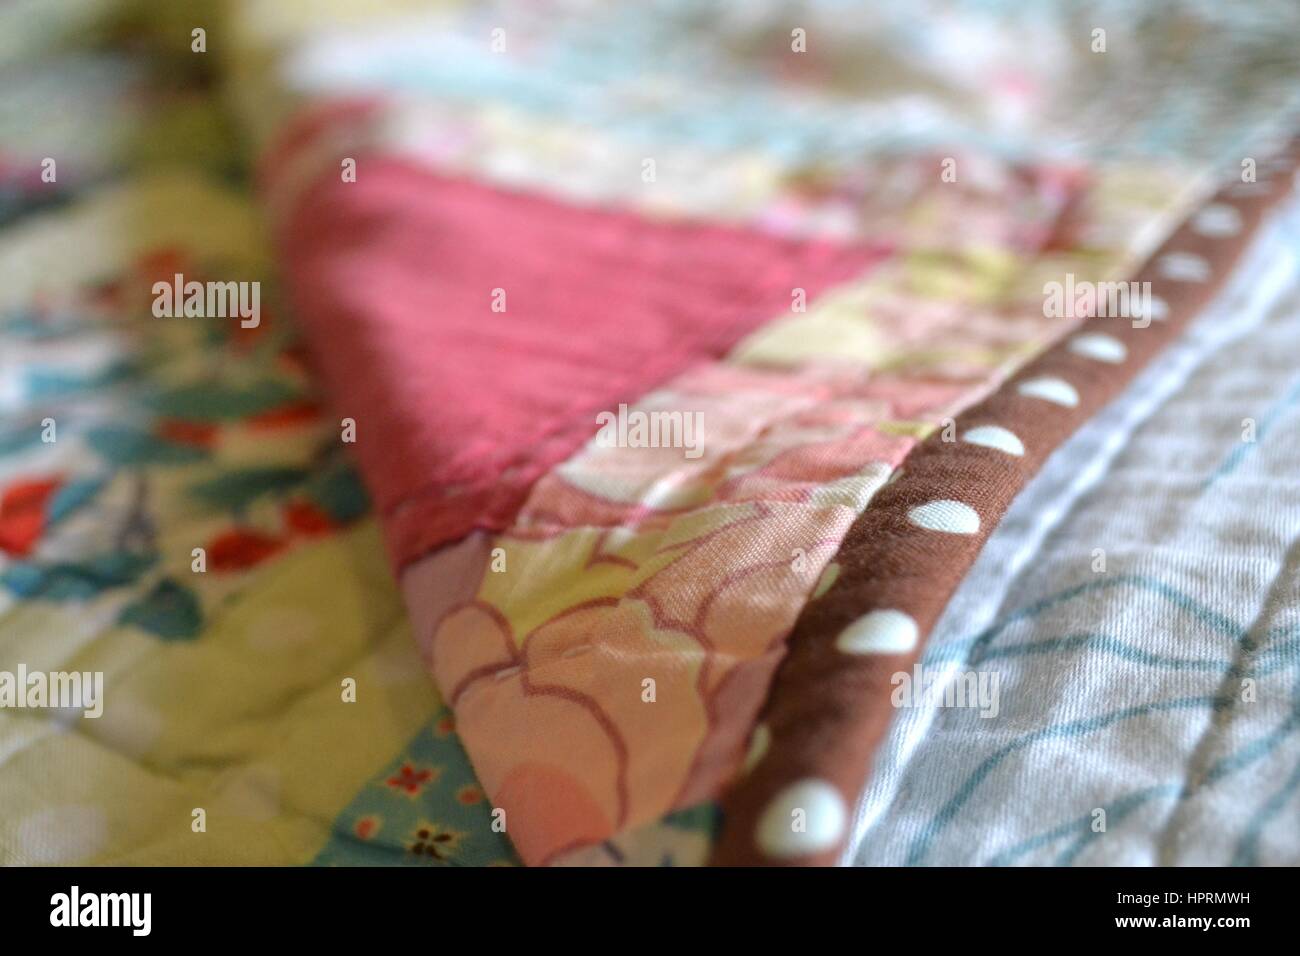 Homemade craftwork hand sewn quilt with intricate stitching Stock Photo